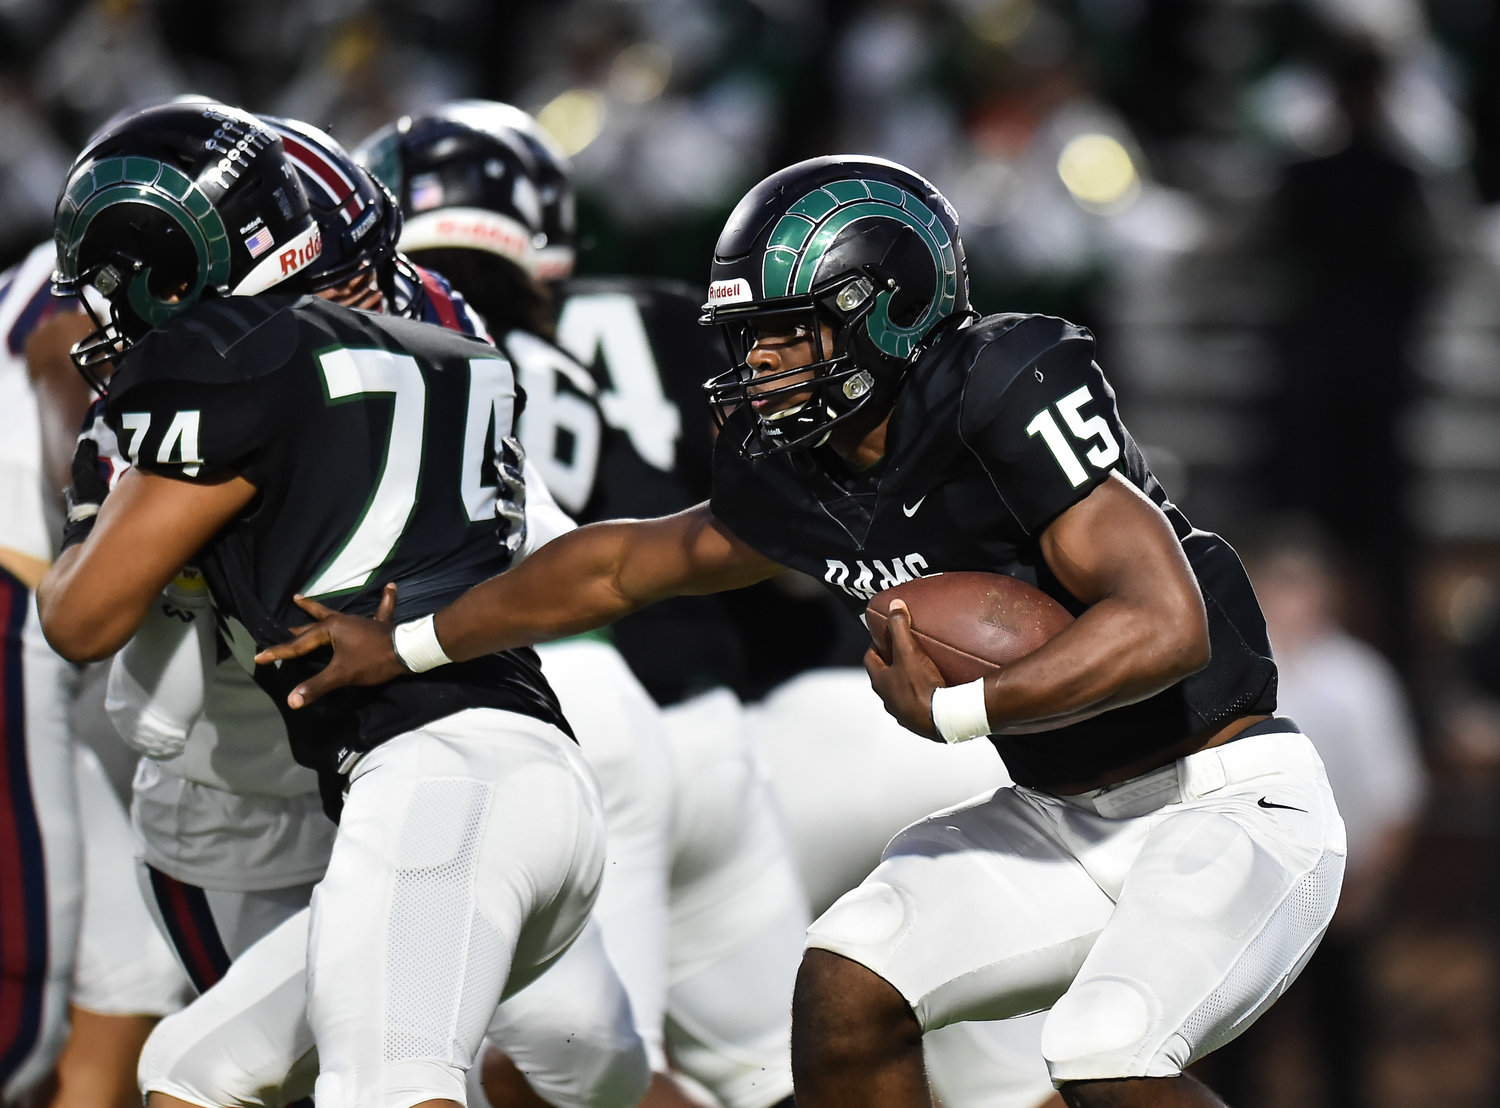 Katy, Tx. Oct. 10, 2019: Mayde Creek's Julius Loughridge (15) carries the ball during a conference game between Tompkins Falcons and Mayde Creek Rams at Rhodes Stadium. (Photo by Mark Goodman / Katy Times)